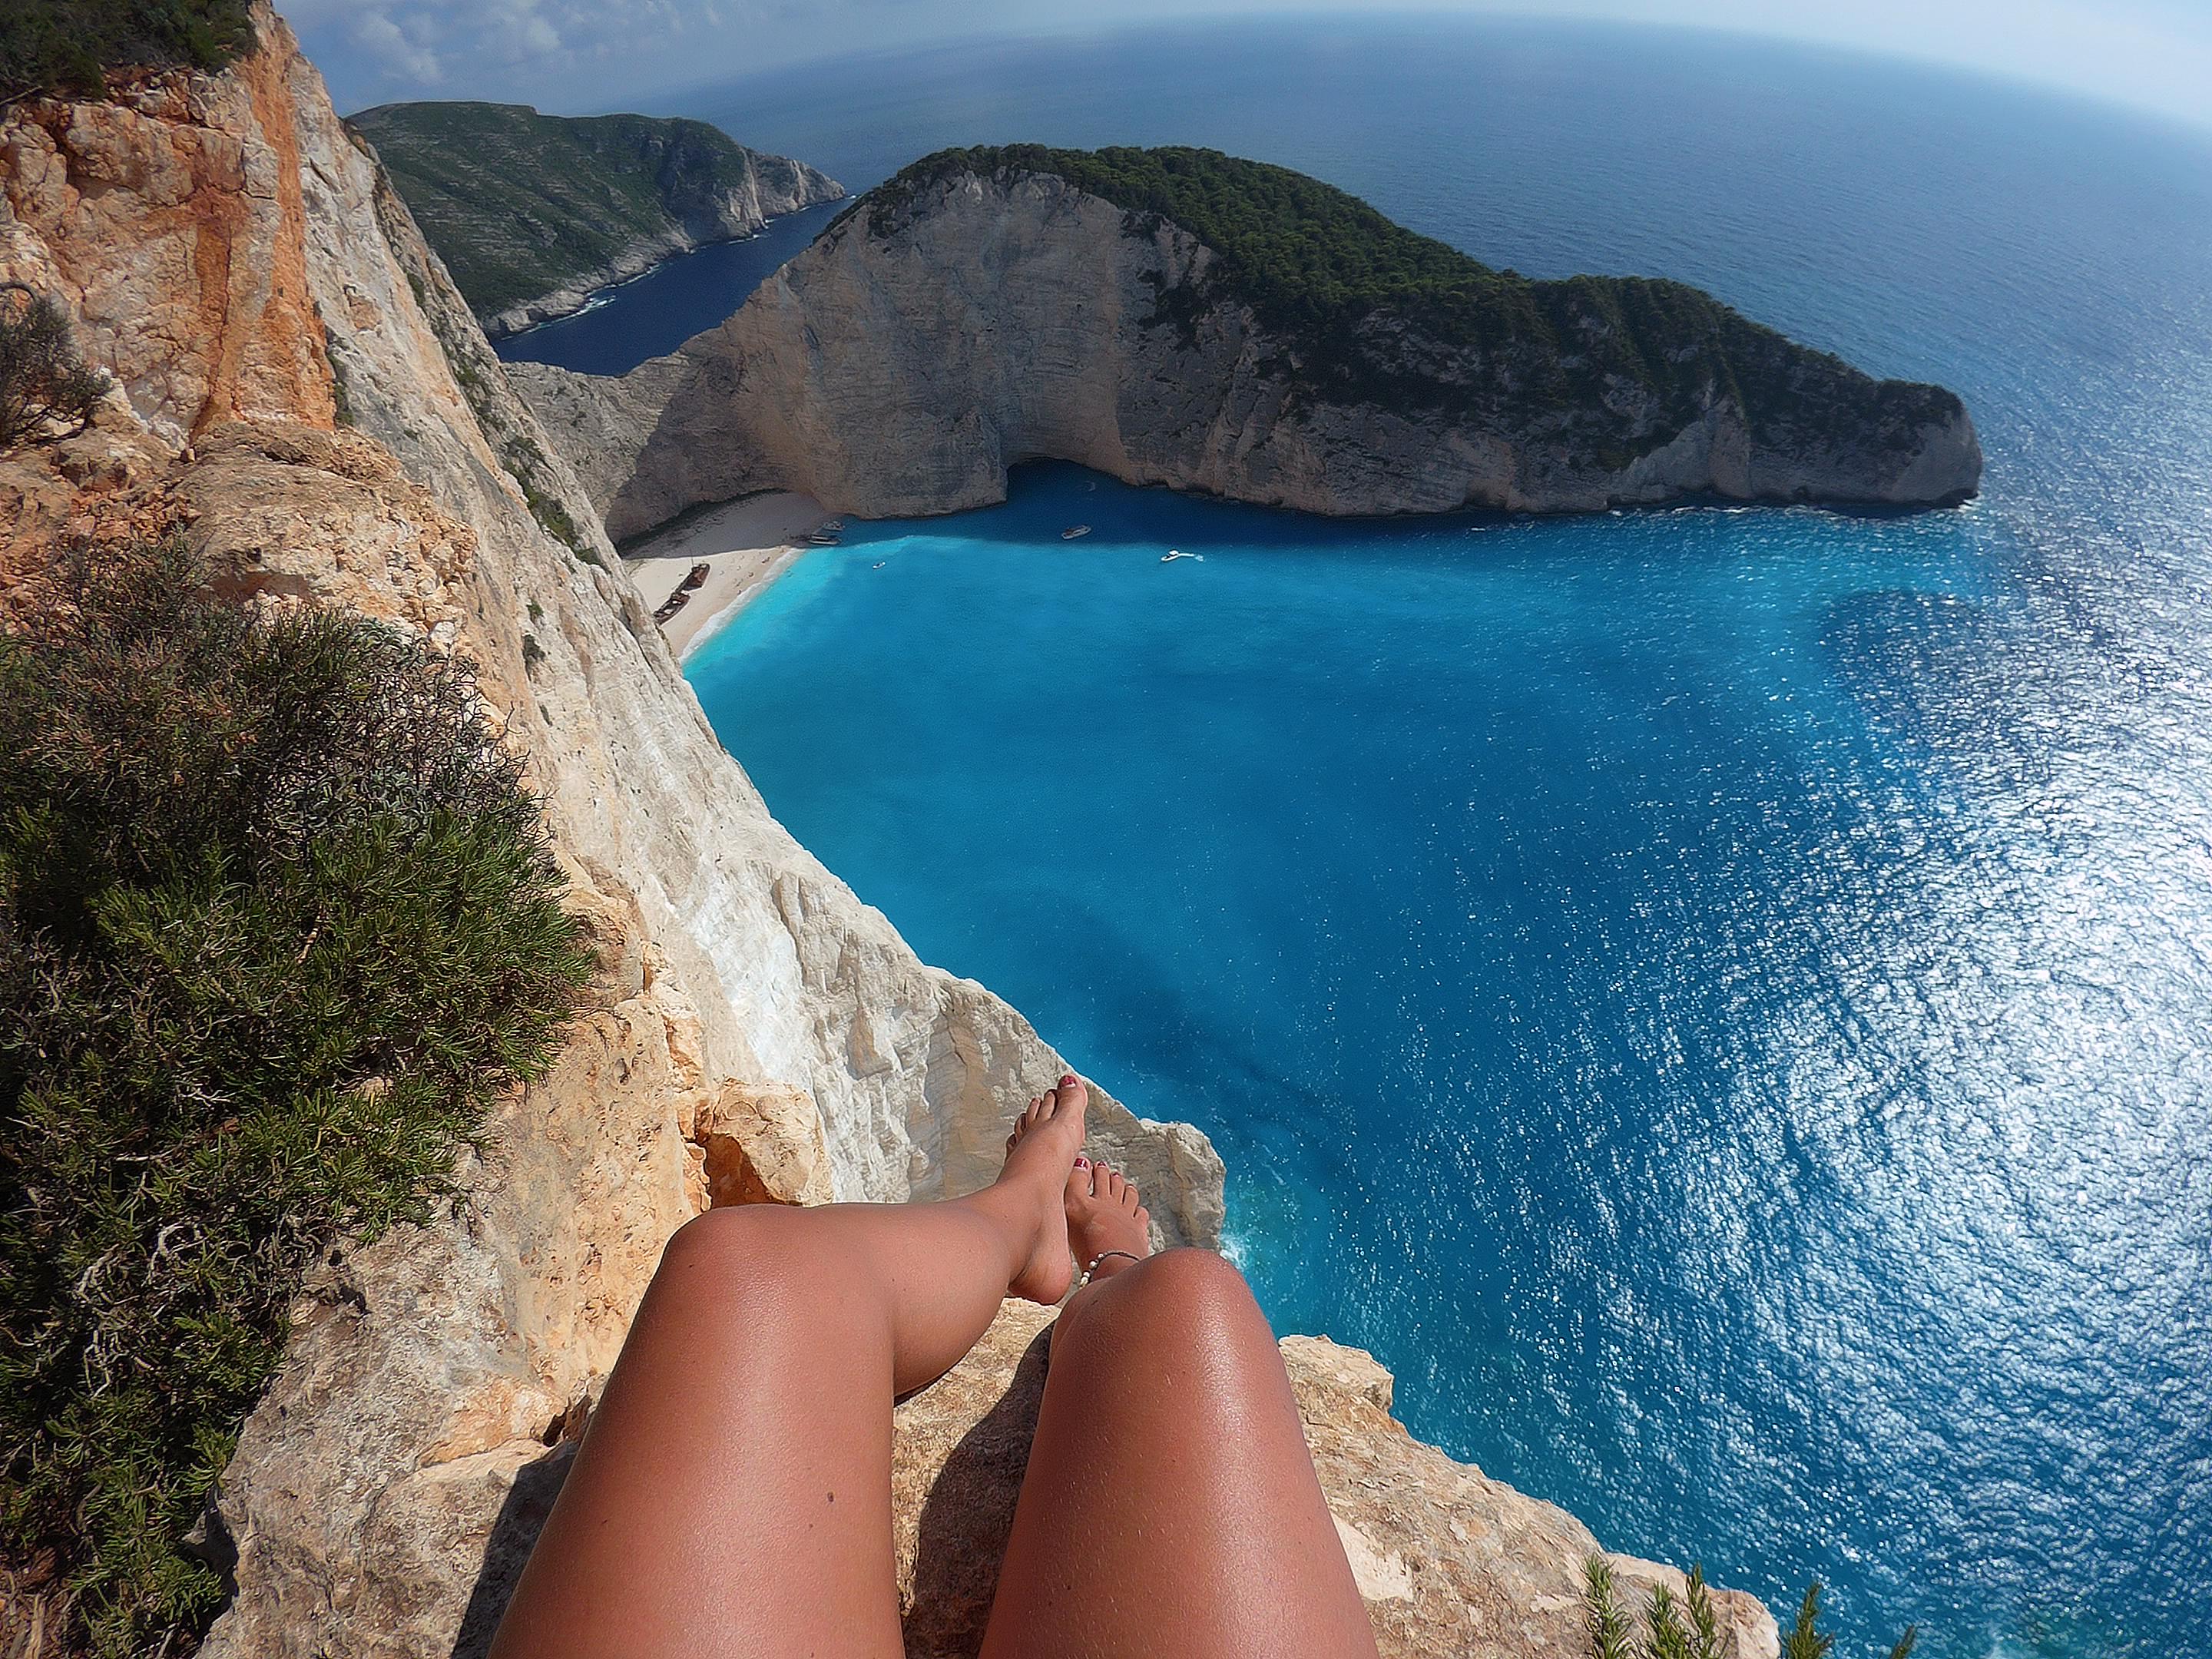 Top 5 Tips For an Amazing Trip to Zakynthos, Greece